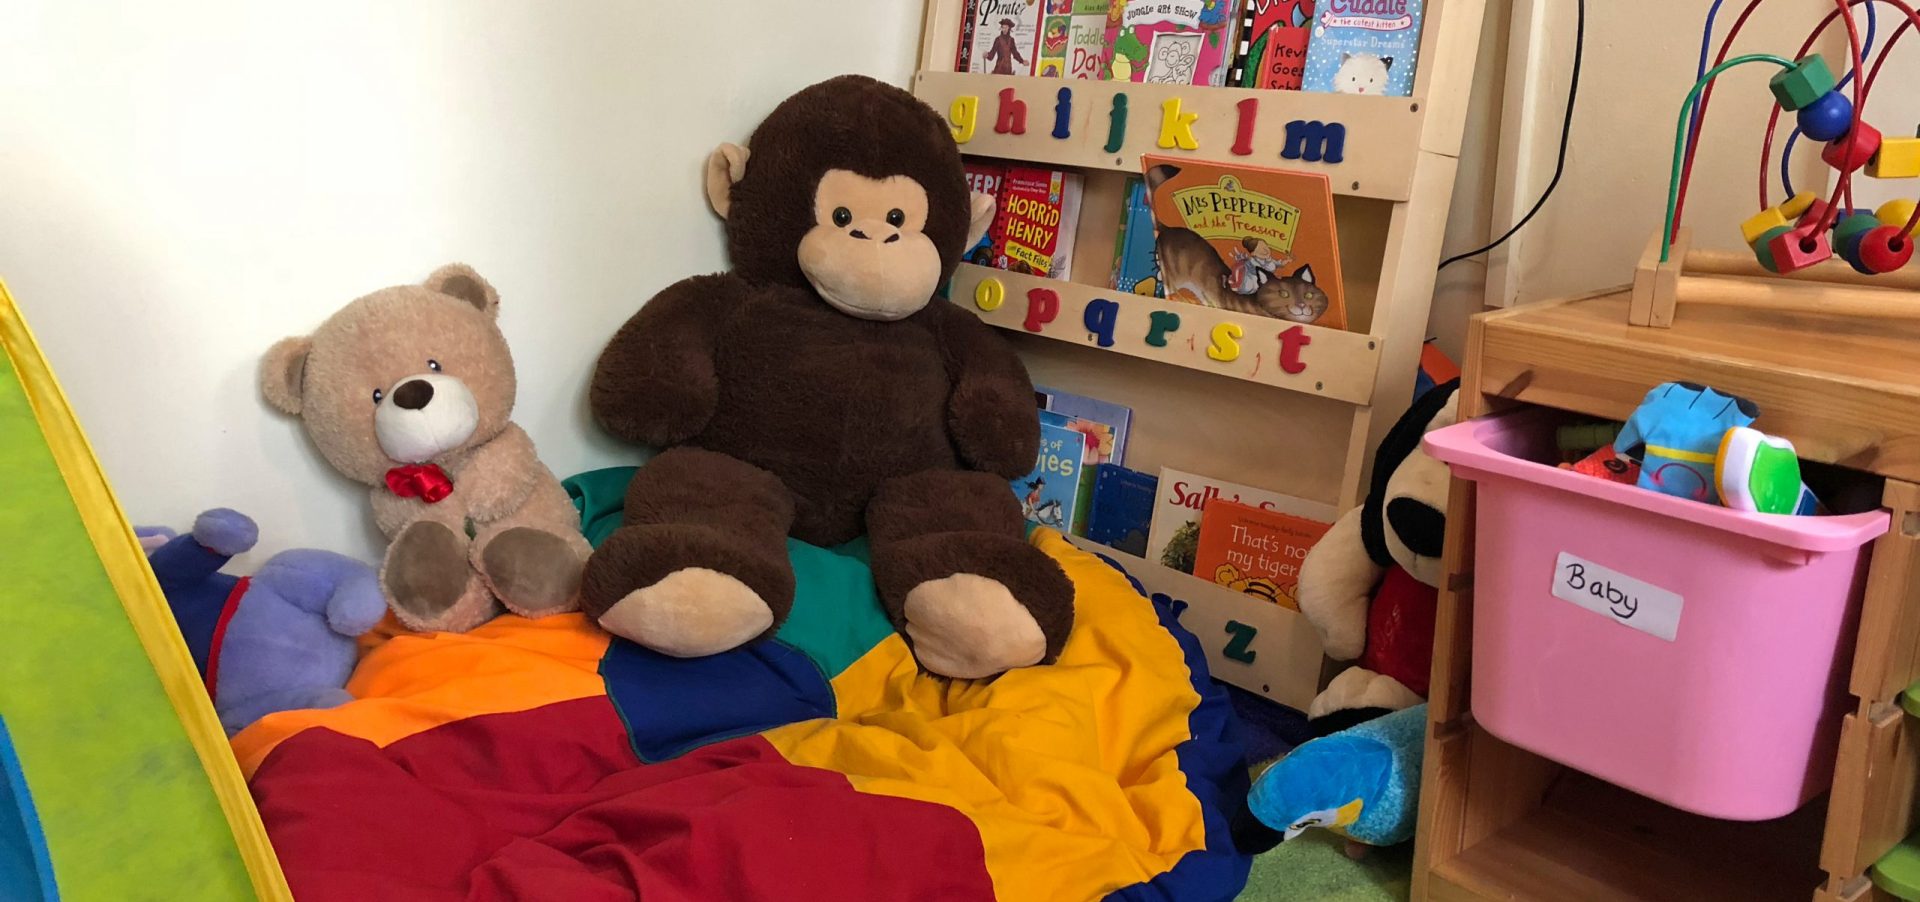 Children's playroom with stuffed animals, blankets and toys scattered throughout.